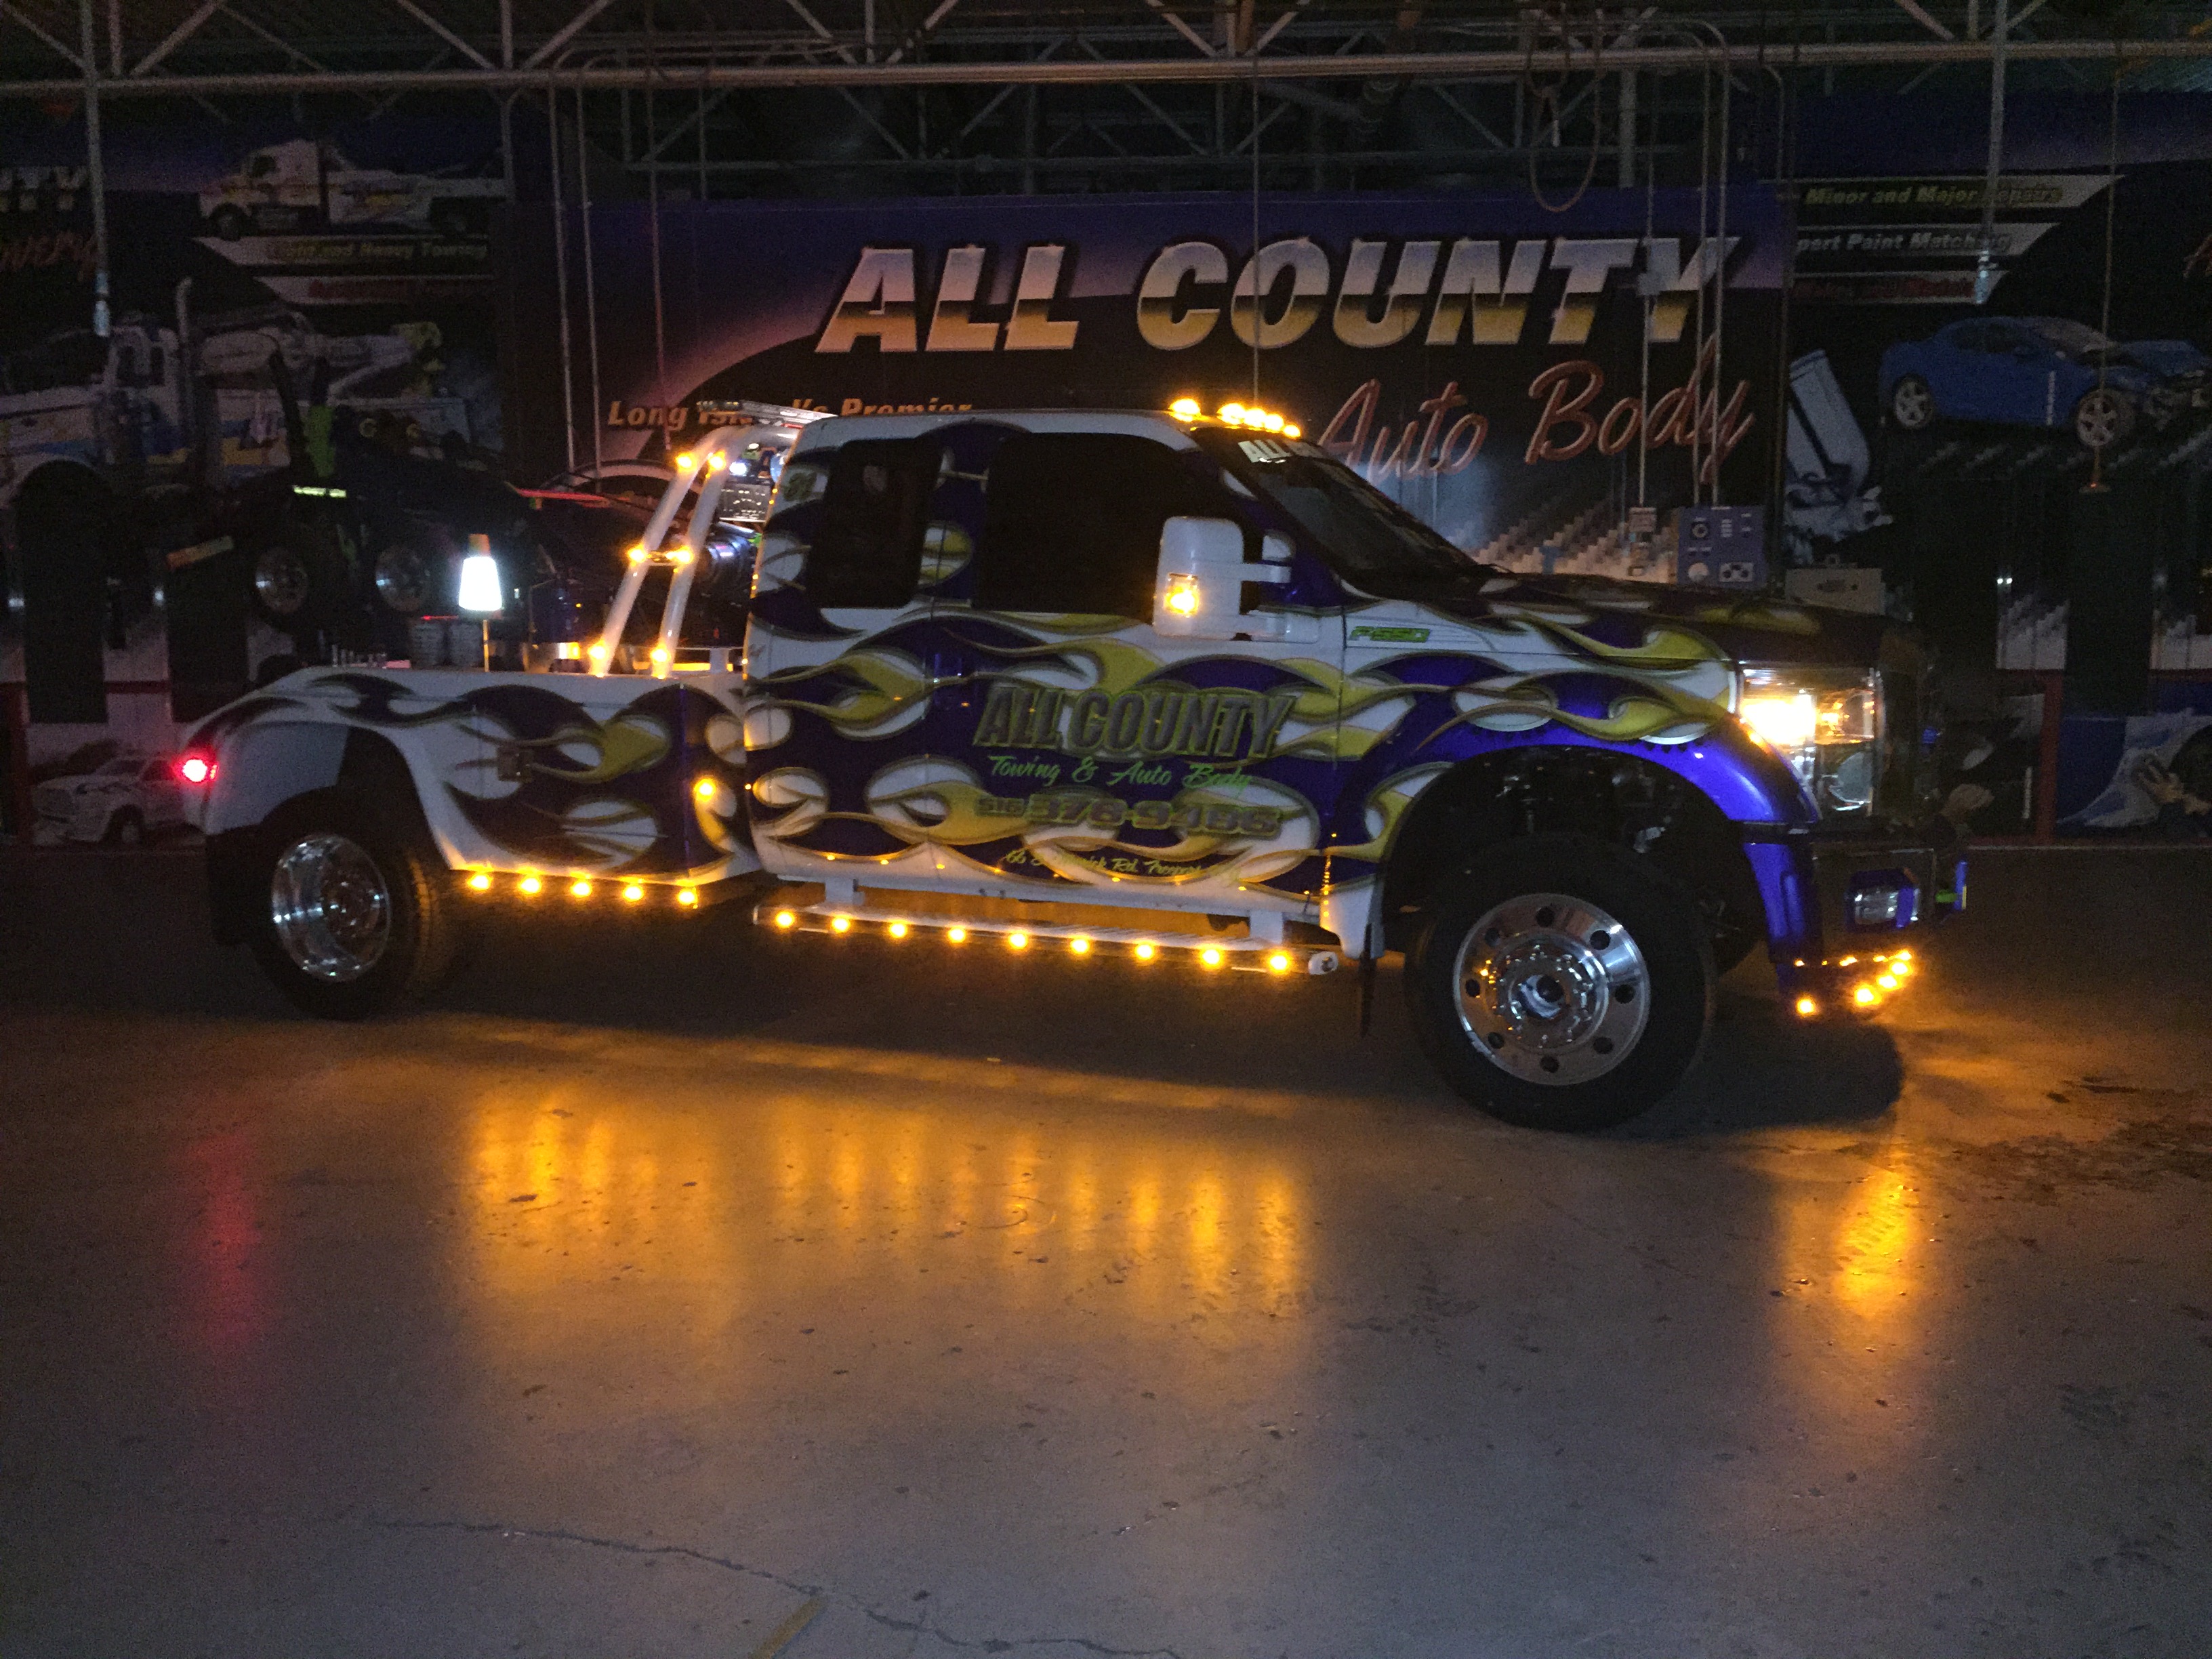 All County Towing & Auto Body Photo